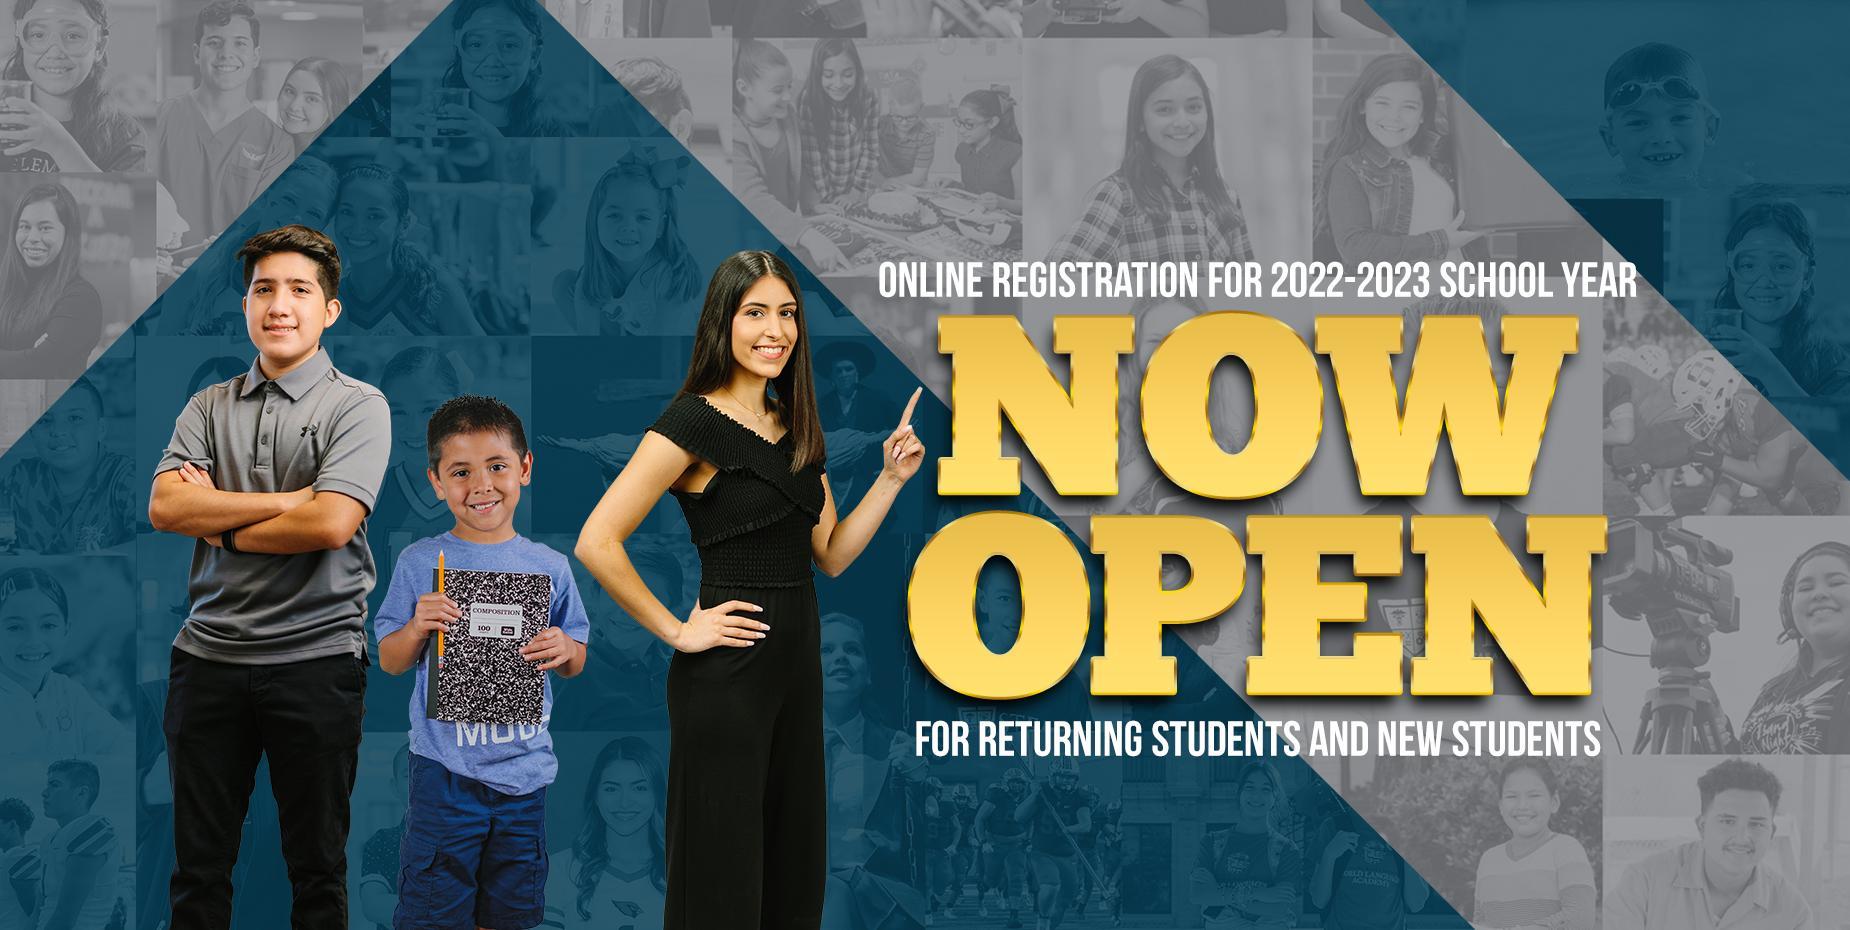 Registration for next school year now open